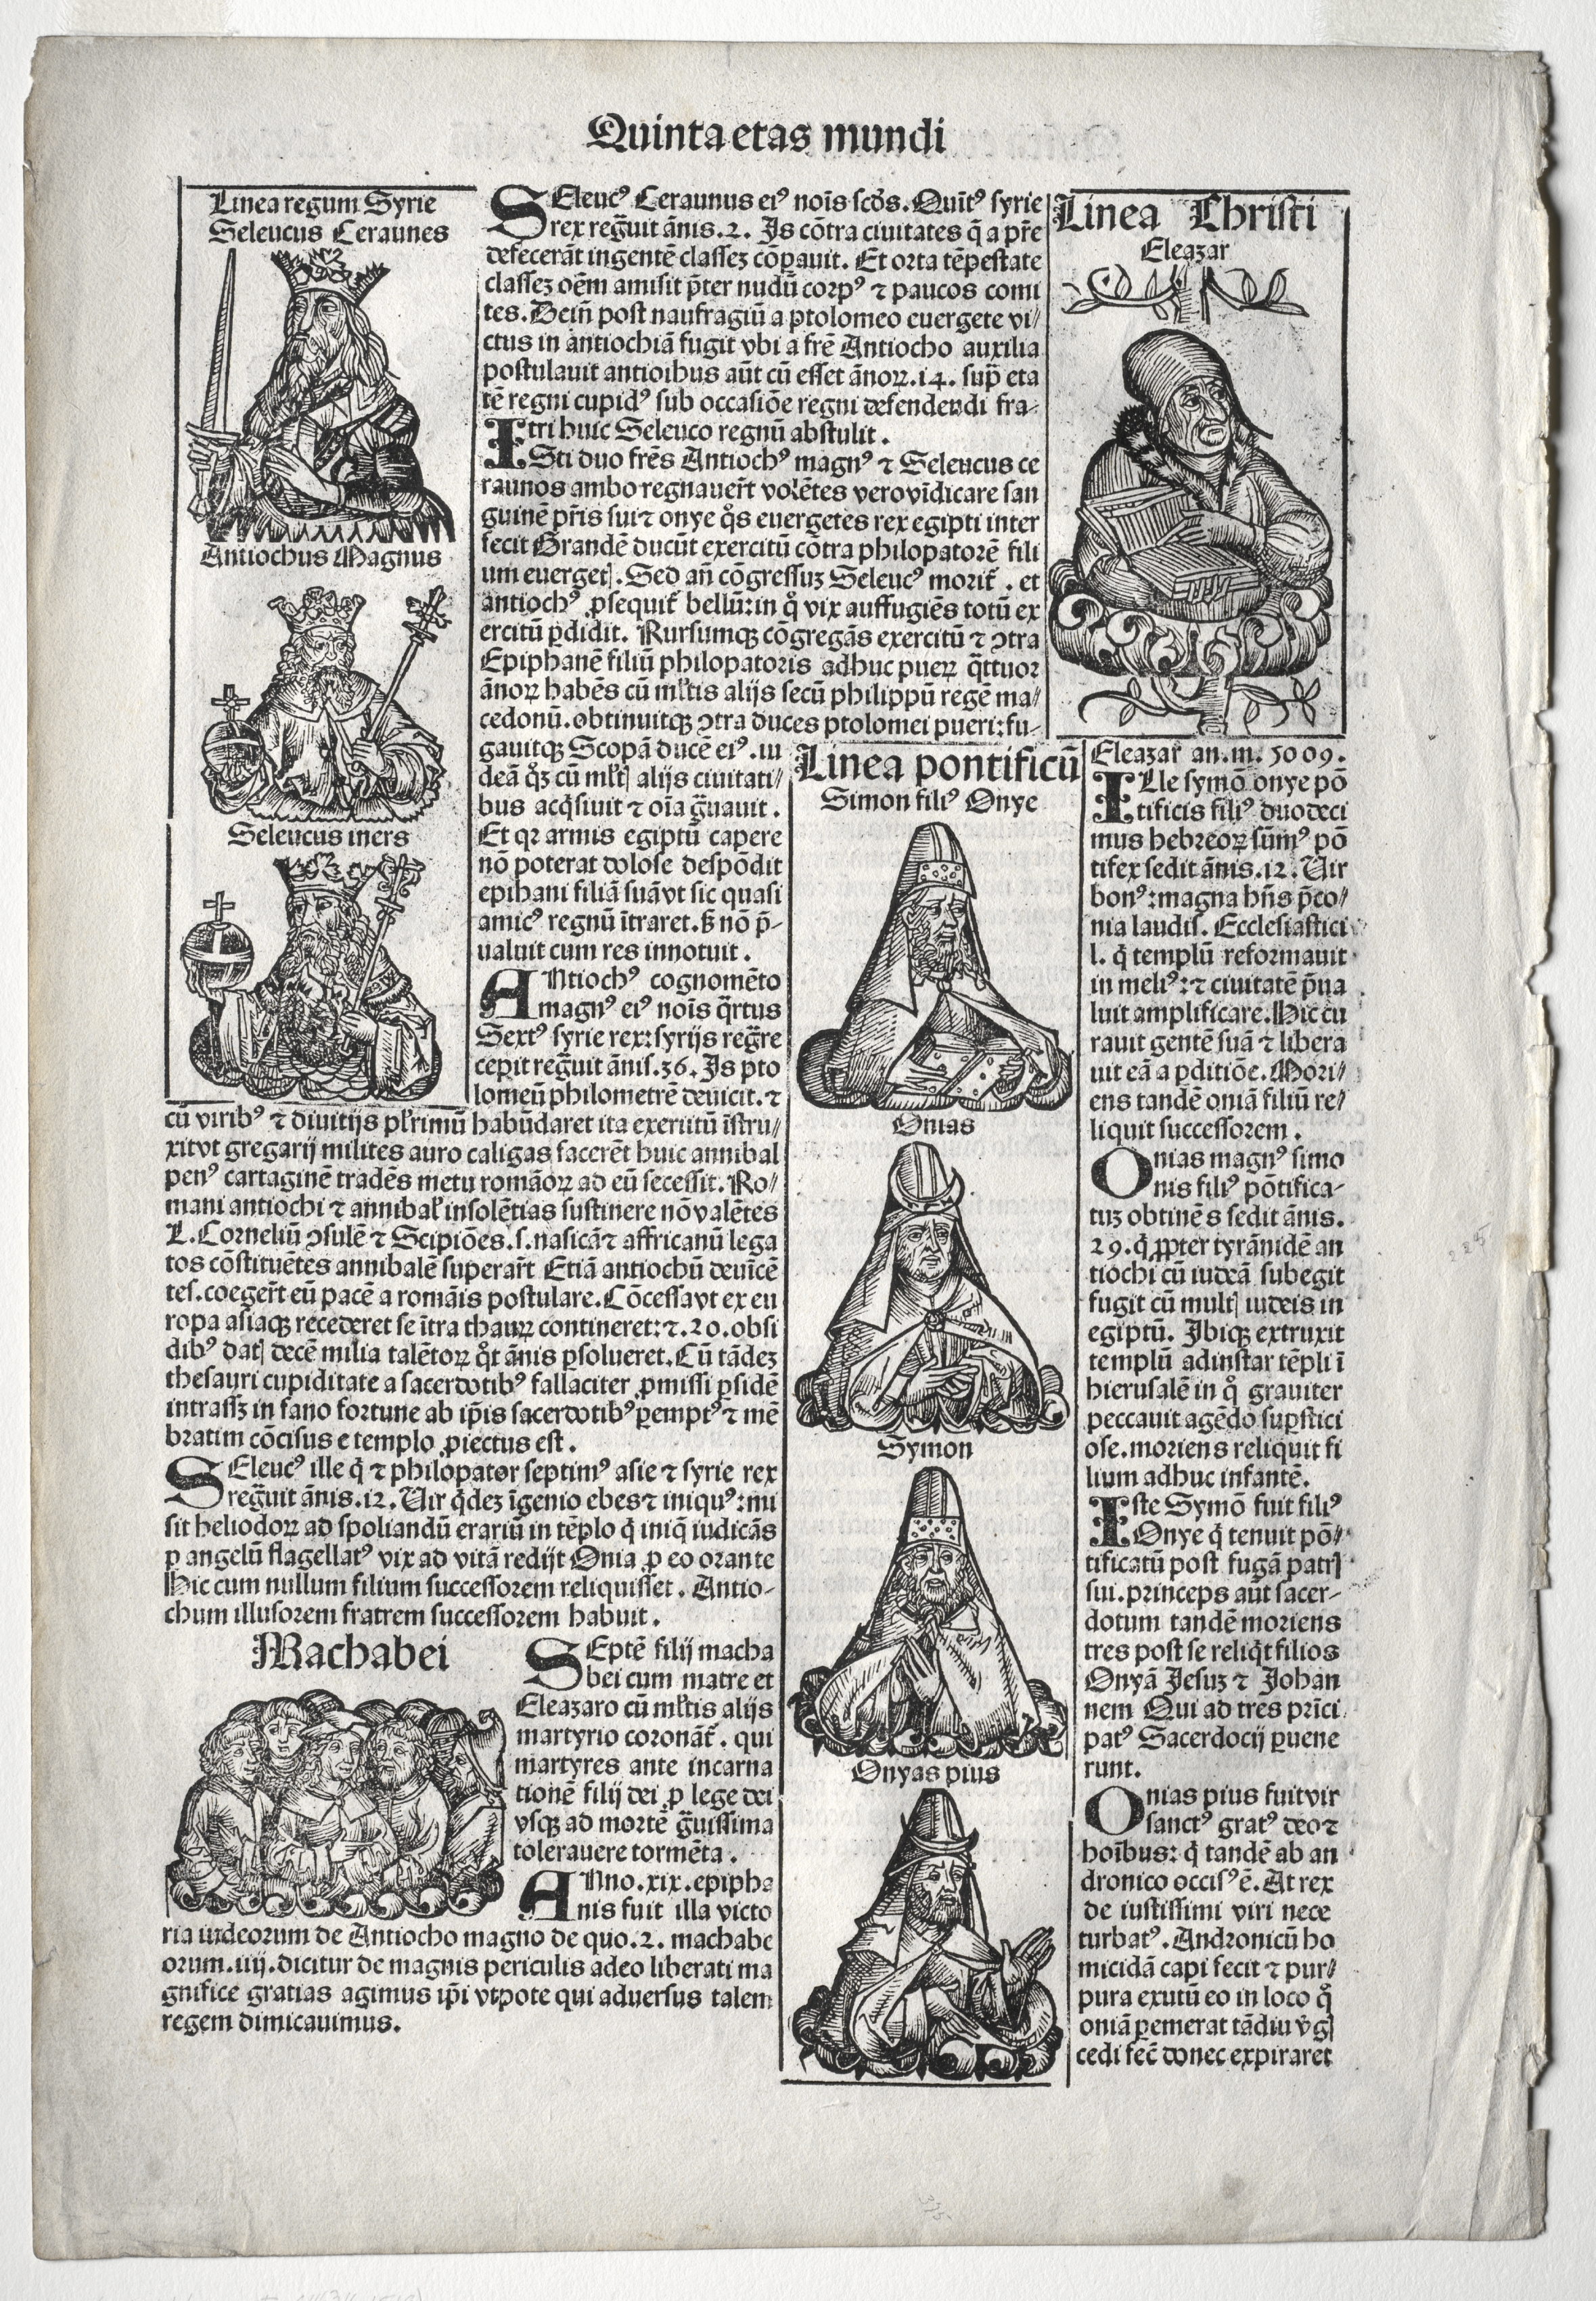 Genealogical Page; published in the Nuremberg Chronicle by Hartmann Schedel 